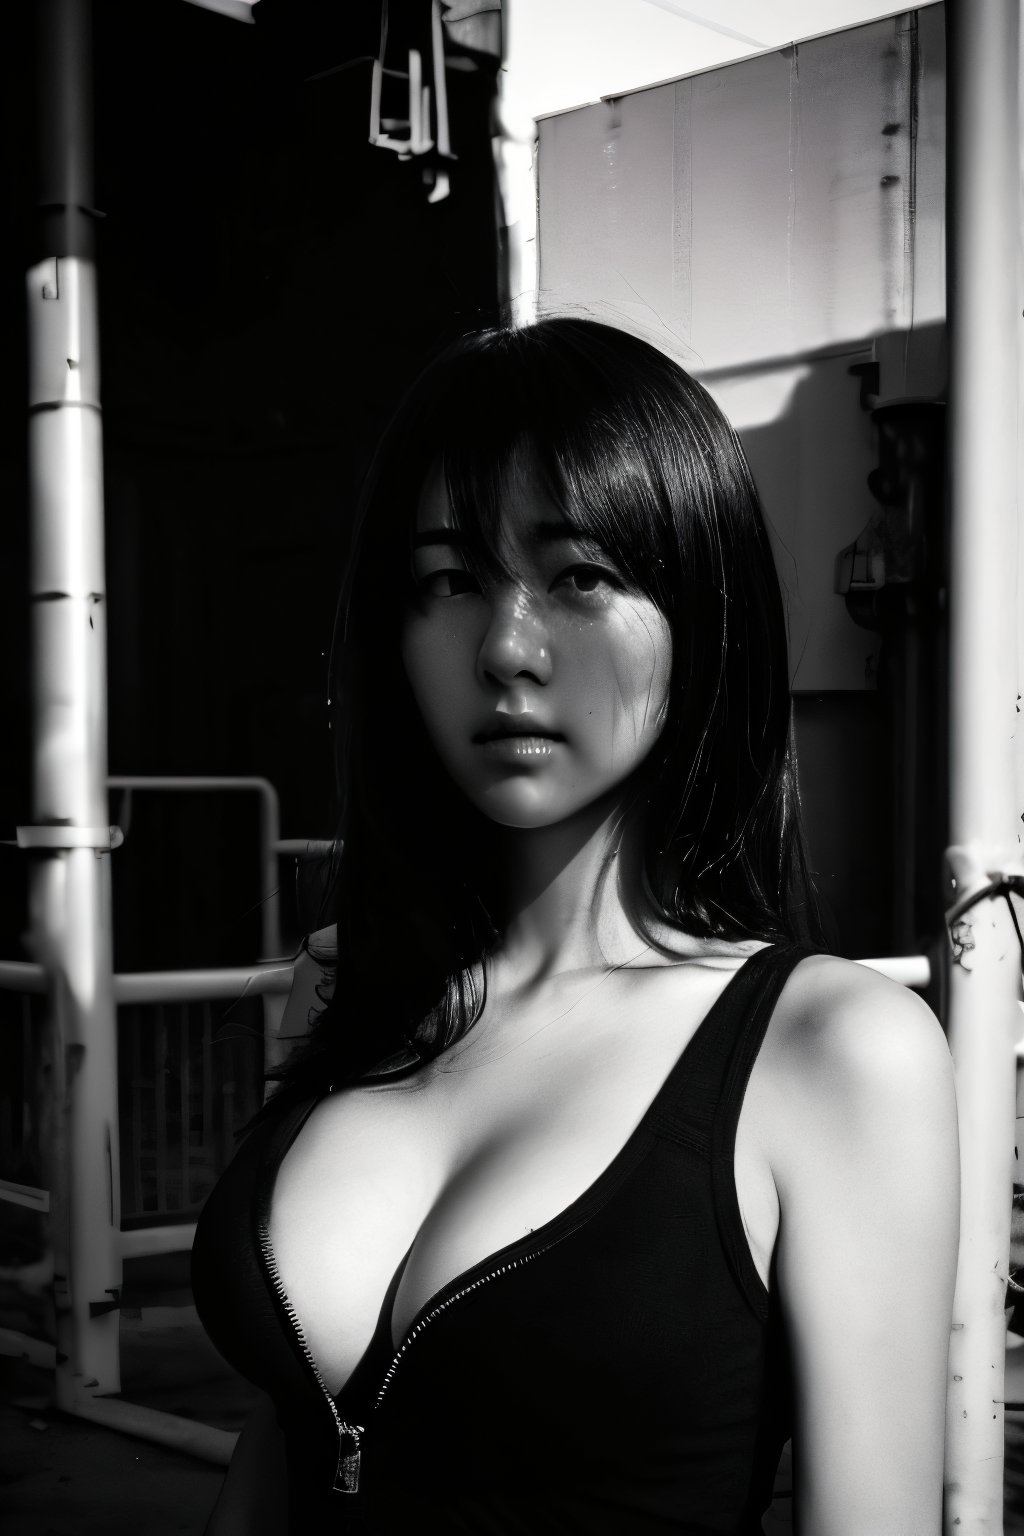 realistic,oraku-b-w,grayscale,portrait,sunset,shadow,japaness,sexy,girl,cyber suit,messy hair,light,outdoor,detailed,real skin,lightshapes,anime,masterpiece,korean girls,cleavage,in space suit,interior,Futuristic room,dark,monochrome,